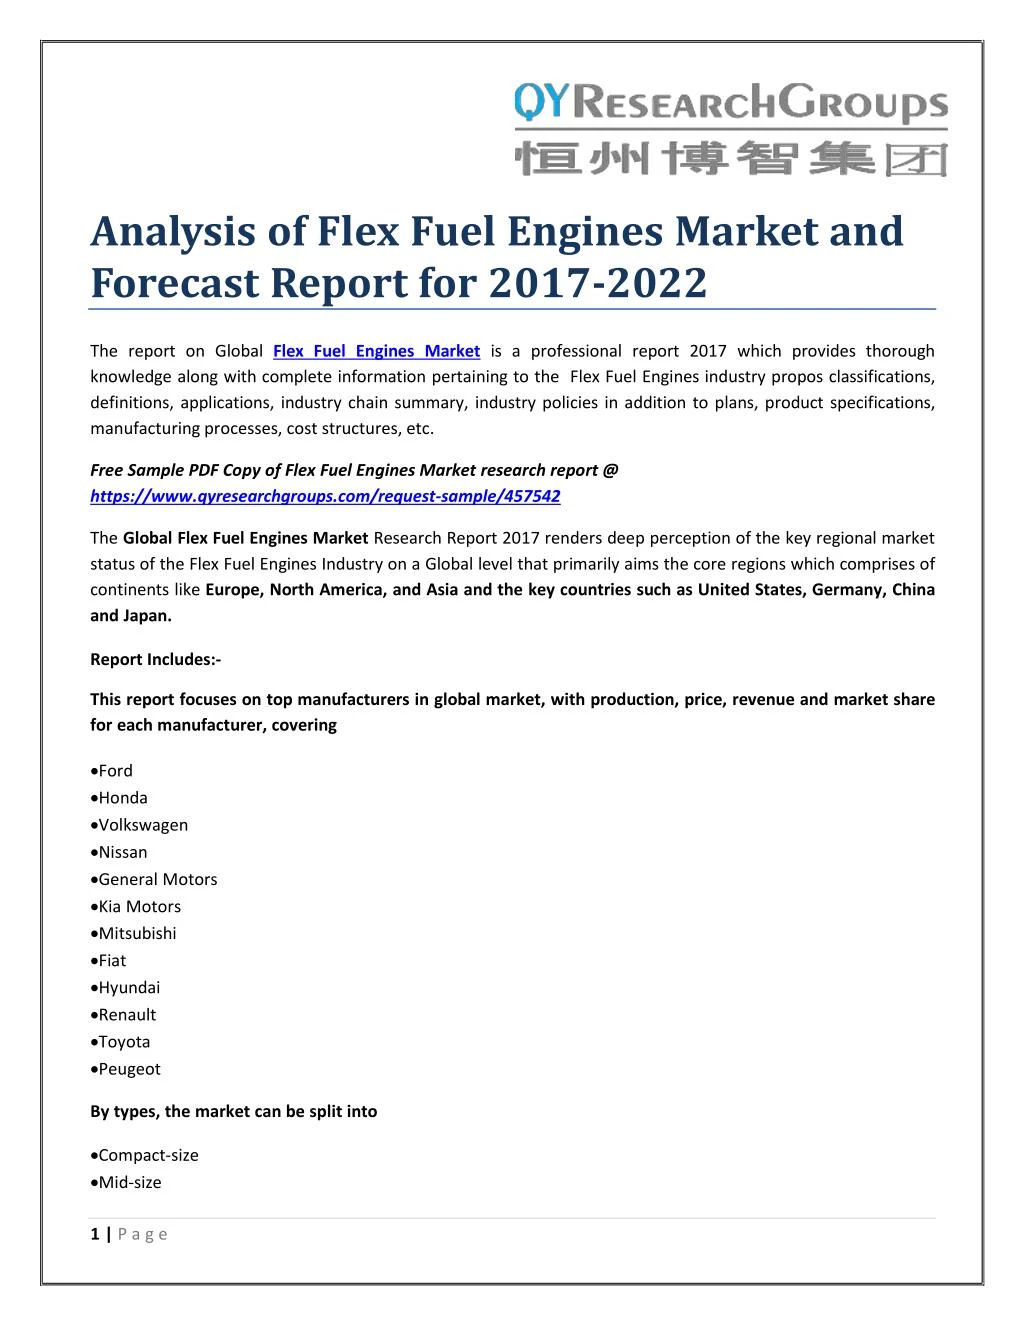 analysis of flex fuel engines market and forecast